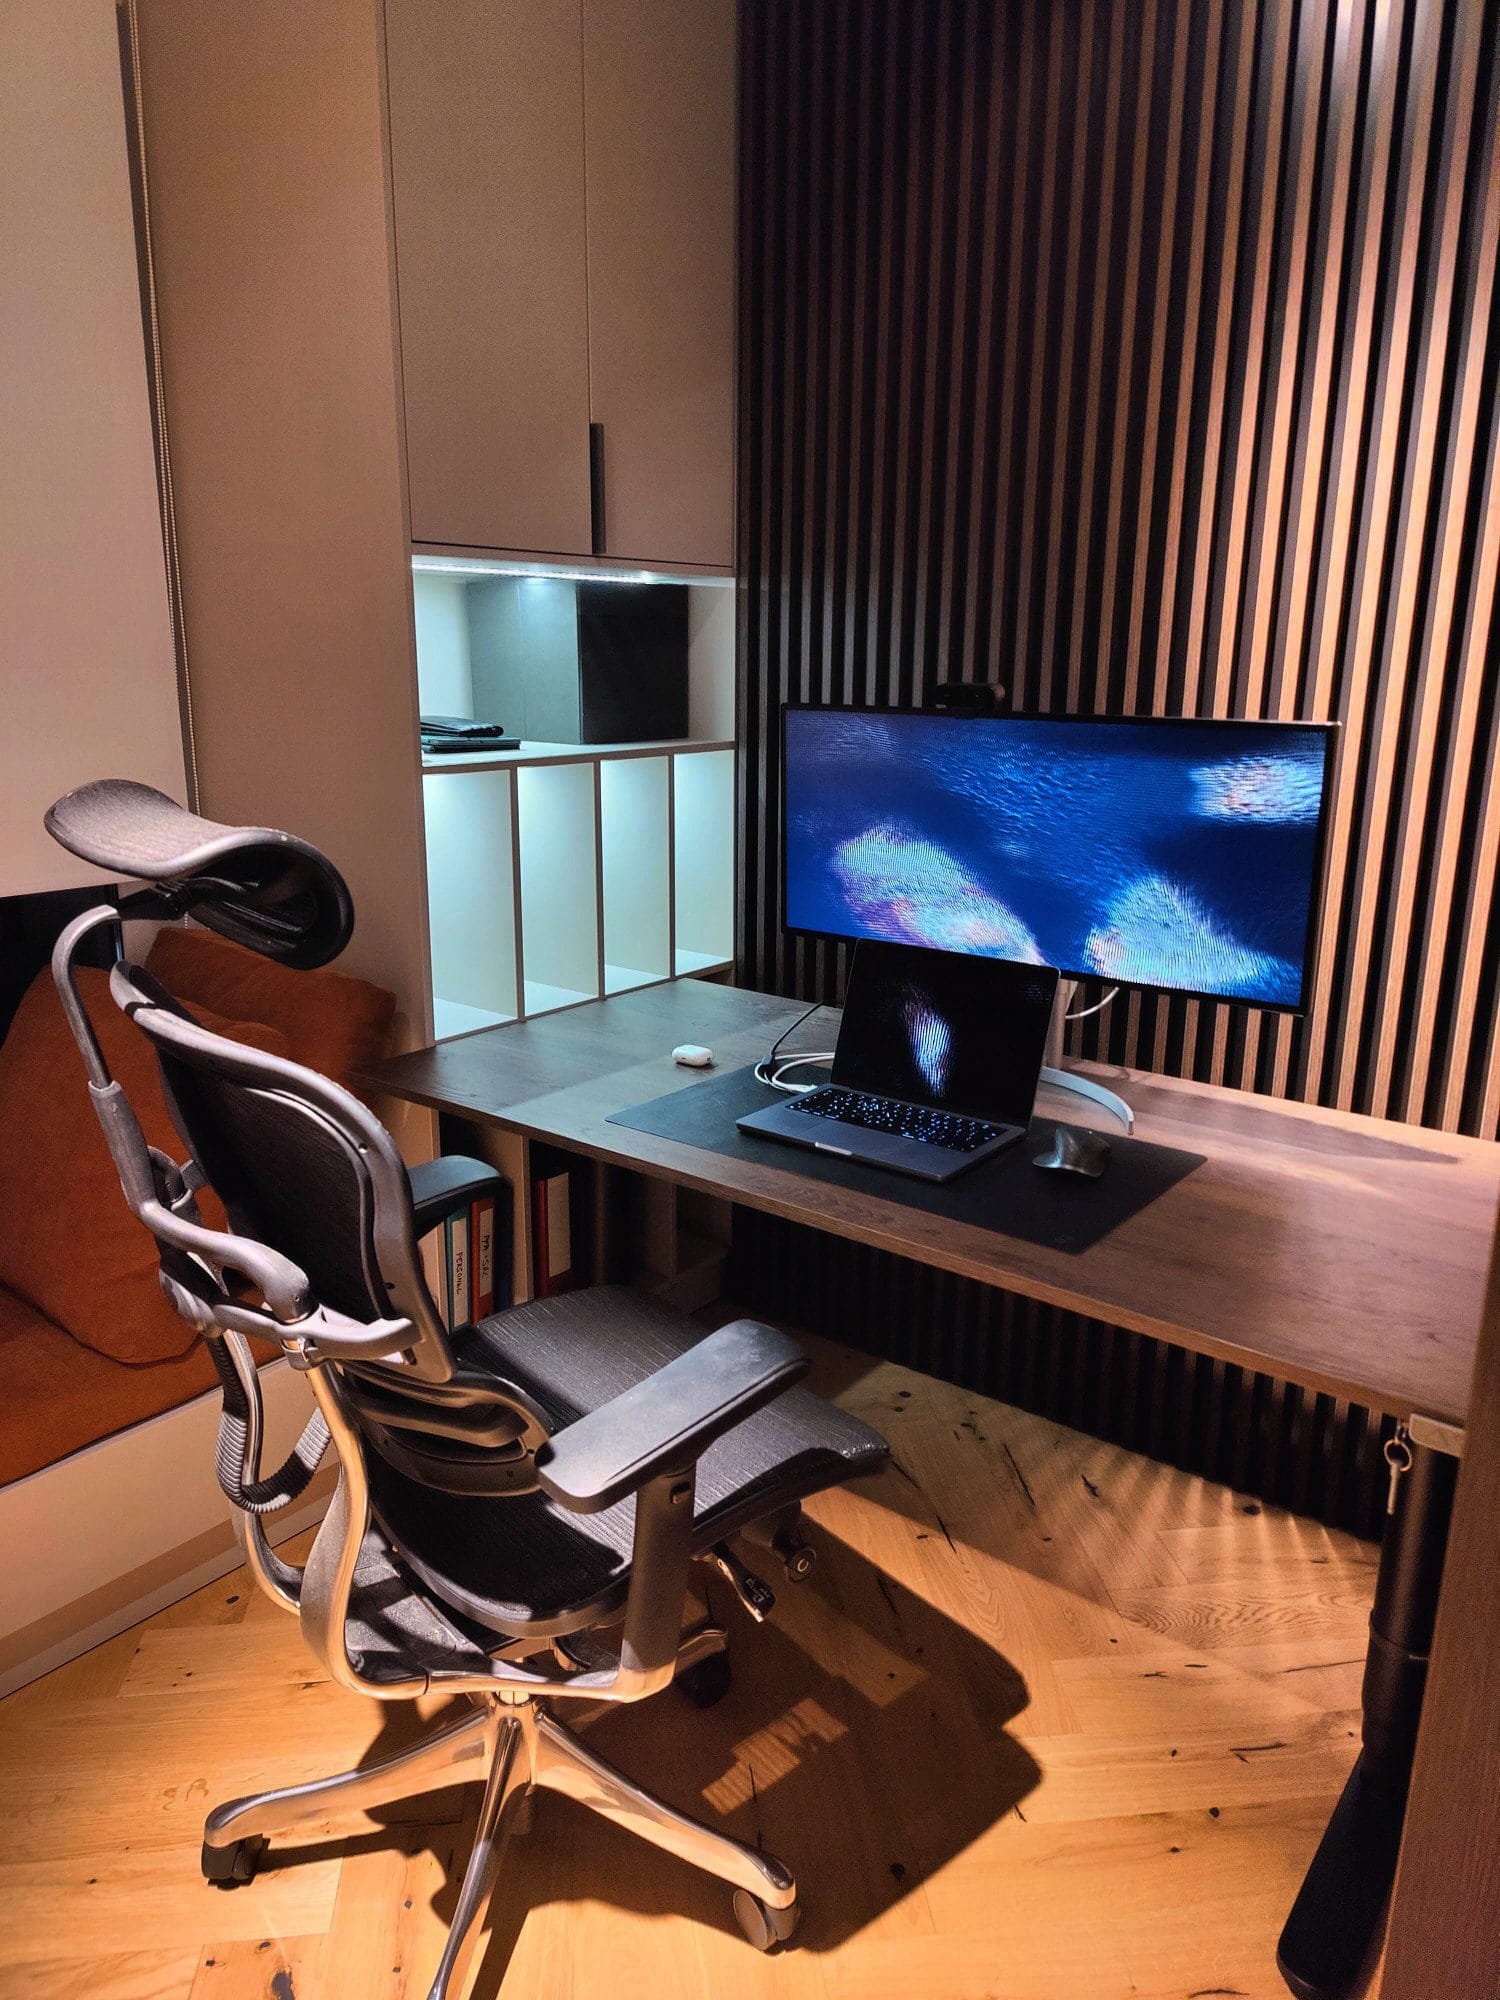 A modern home office with a high-backed ergonomic chair, a wooden desk housing a monitor and laptop, set against a backdrop of warm-toned vertical slatted wall panels and a white shelving unit